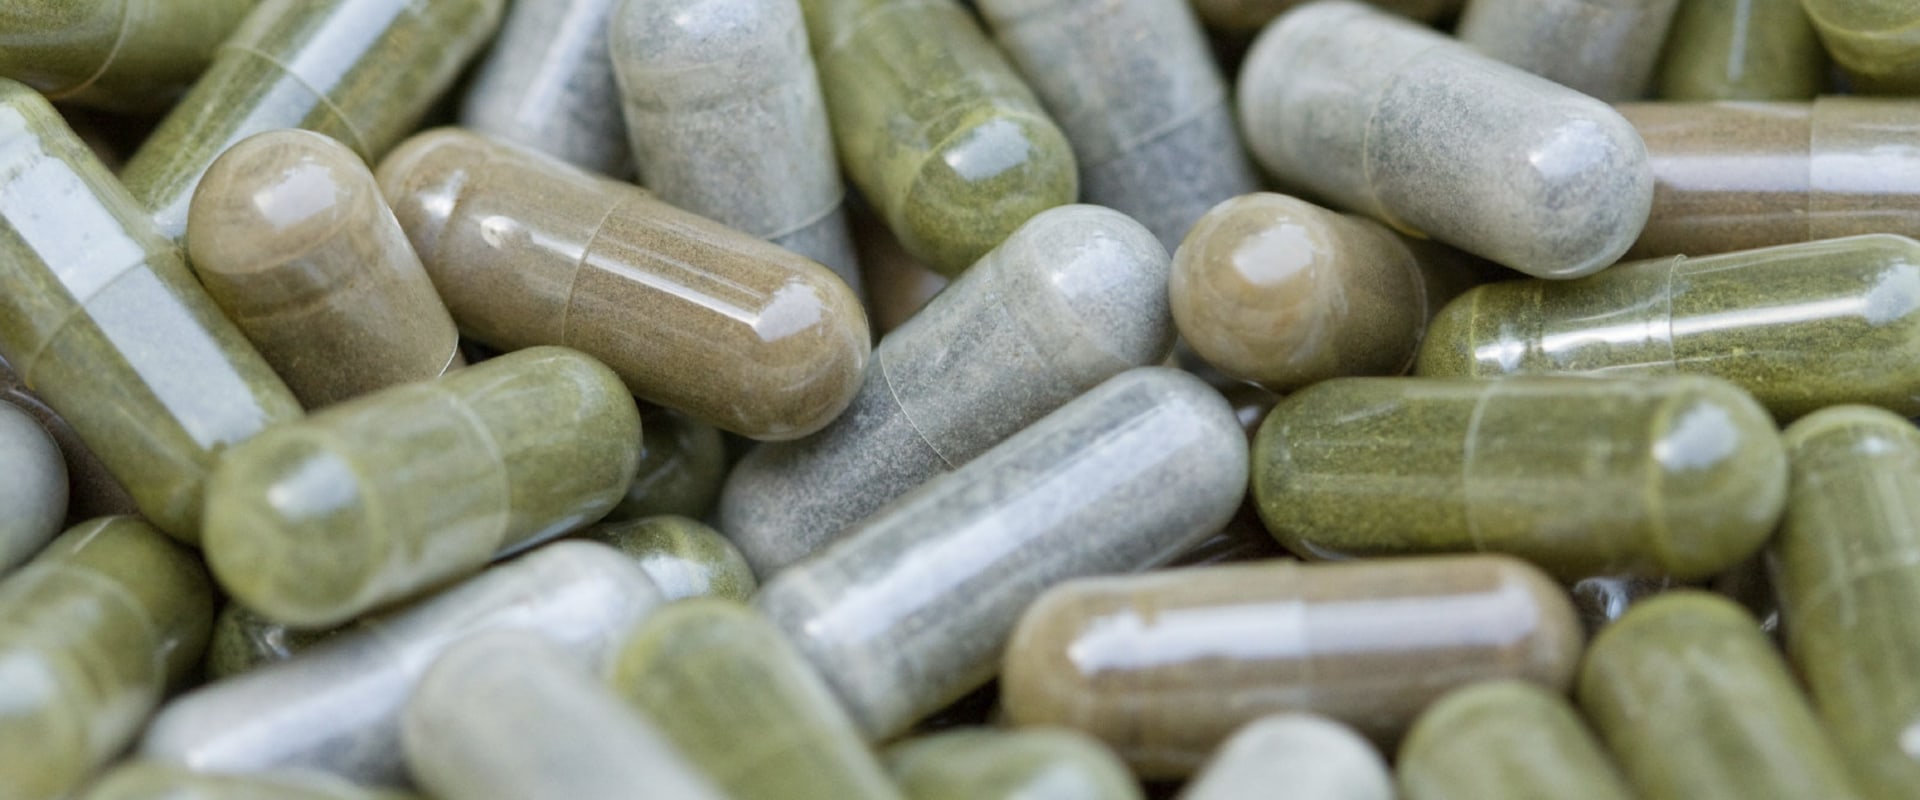 The Dangers of Taking Supplements: What You Need to Know